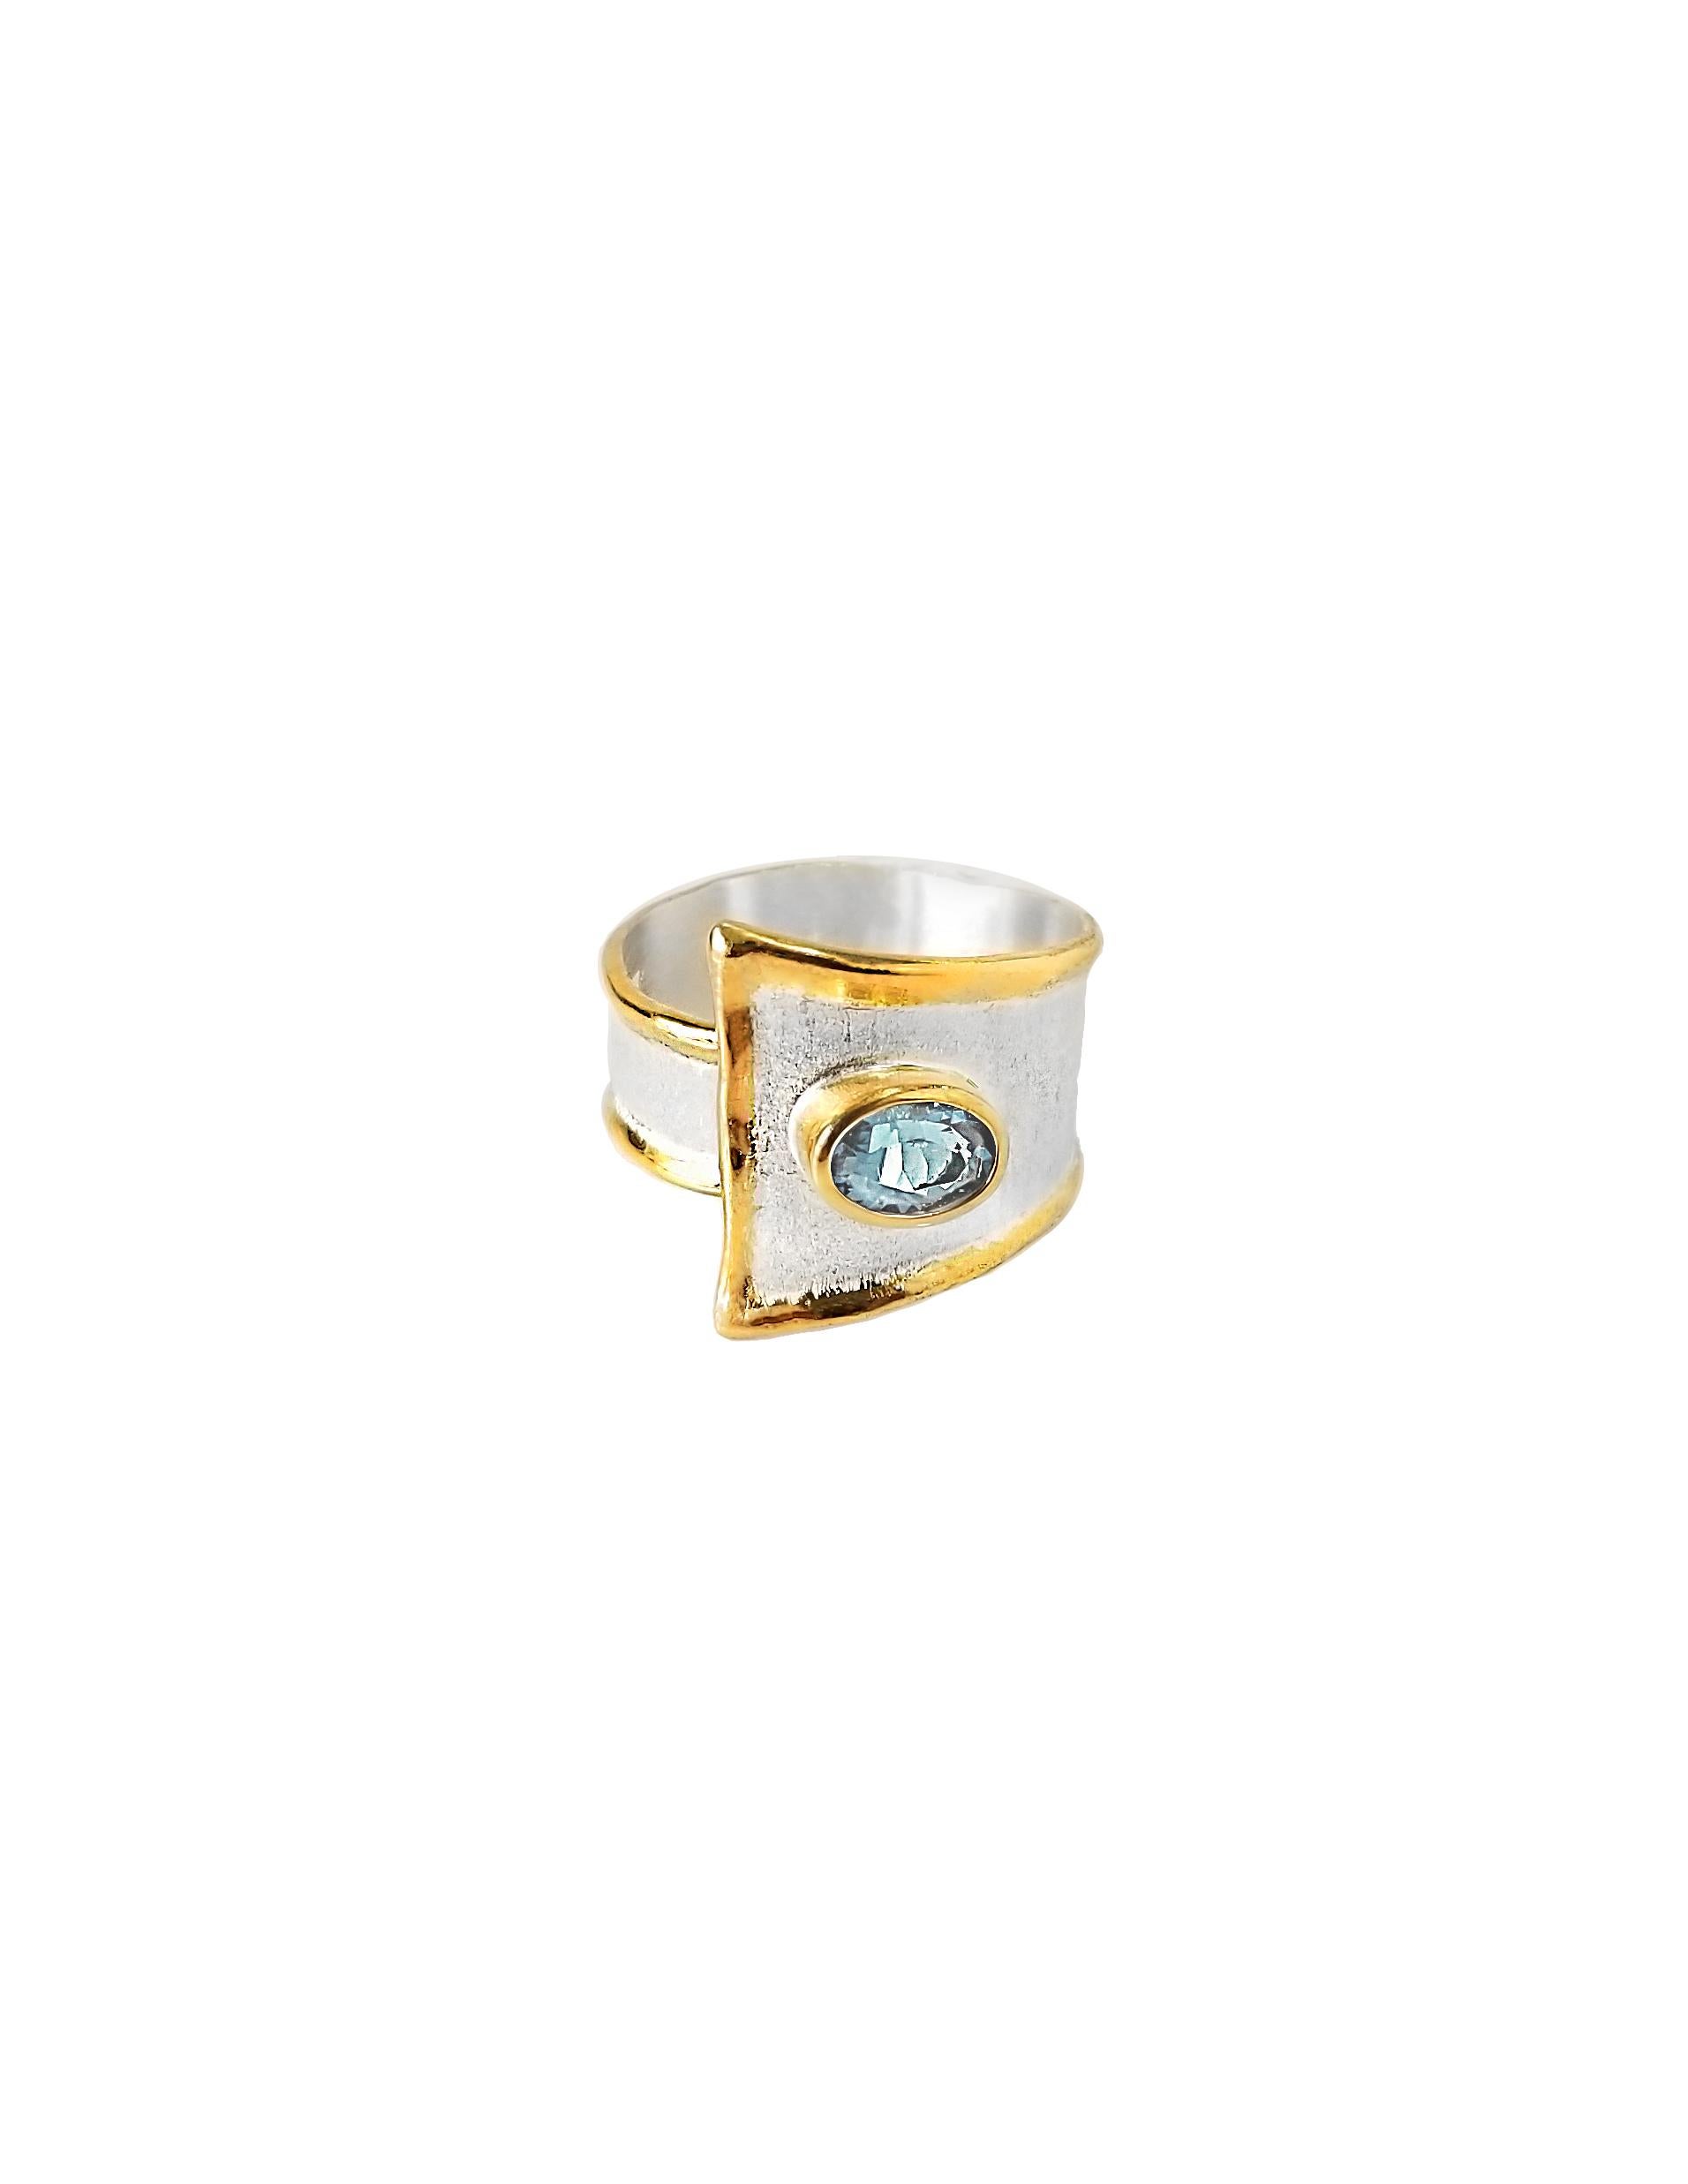 Stunning Yianni Creations Midas Collection set of bracelet and ring handmade from fine silver 950 purity plated with palladium to resist against elements. The liquid edges are plated with a thick overlay of 24 karats yellow gold. The ring features